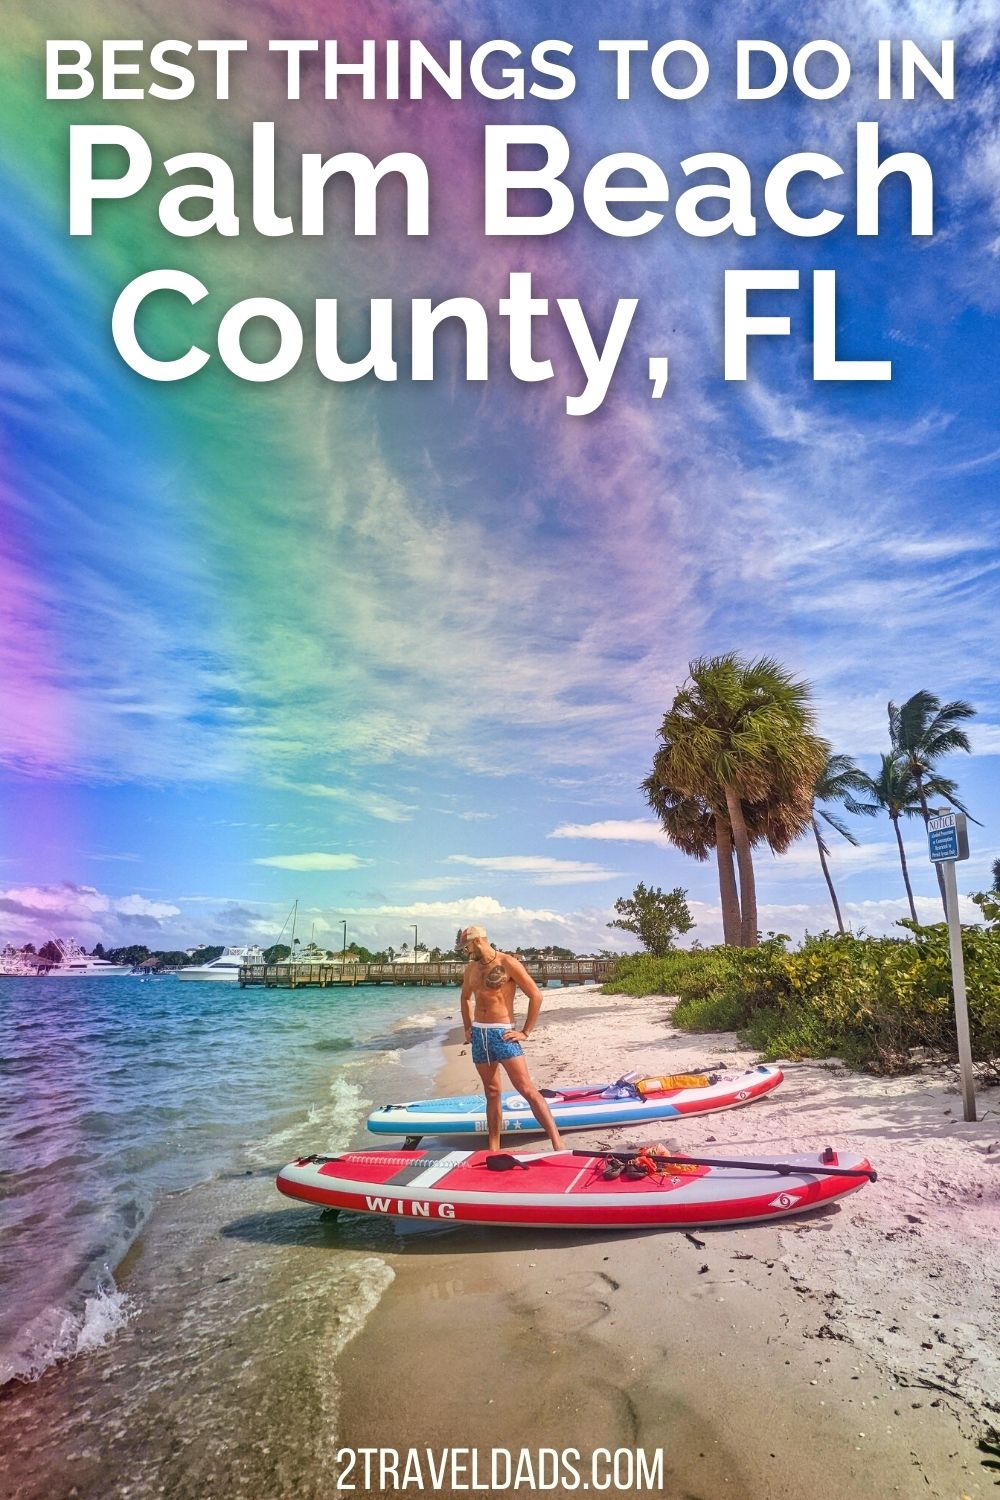 Things to do in Palm Beach County range from relaxing beach time to epic beautiful gardens, Gilded Age museums to paddle boarding with manatees. Top picks for Palm Beach County activities, food and more.